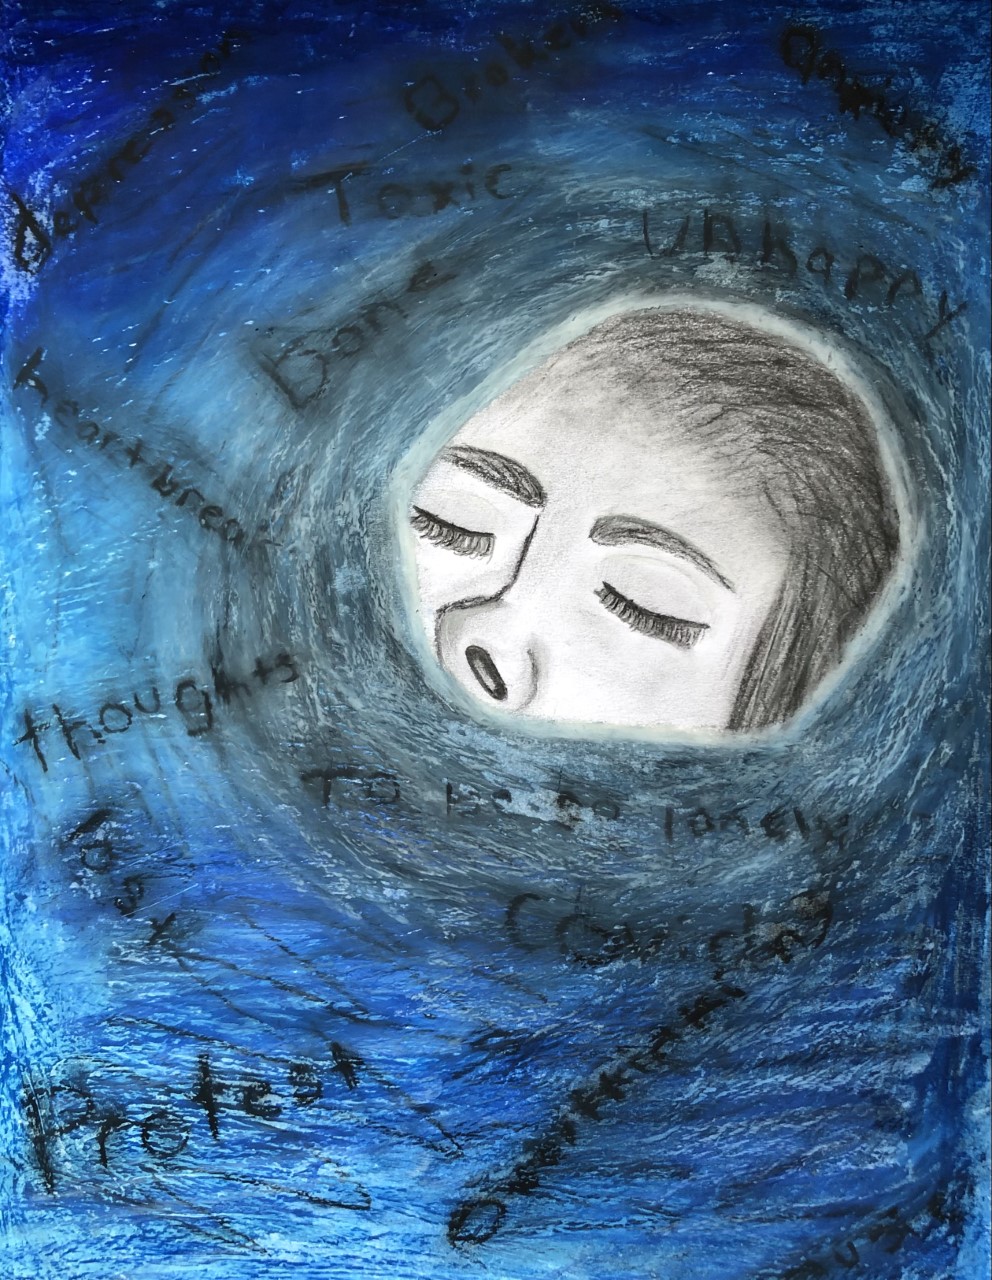 The top of a girl's head being surrounded by water that is filled with words describing negative emotions.